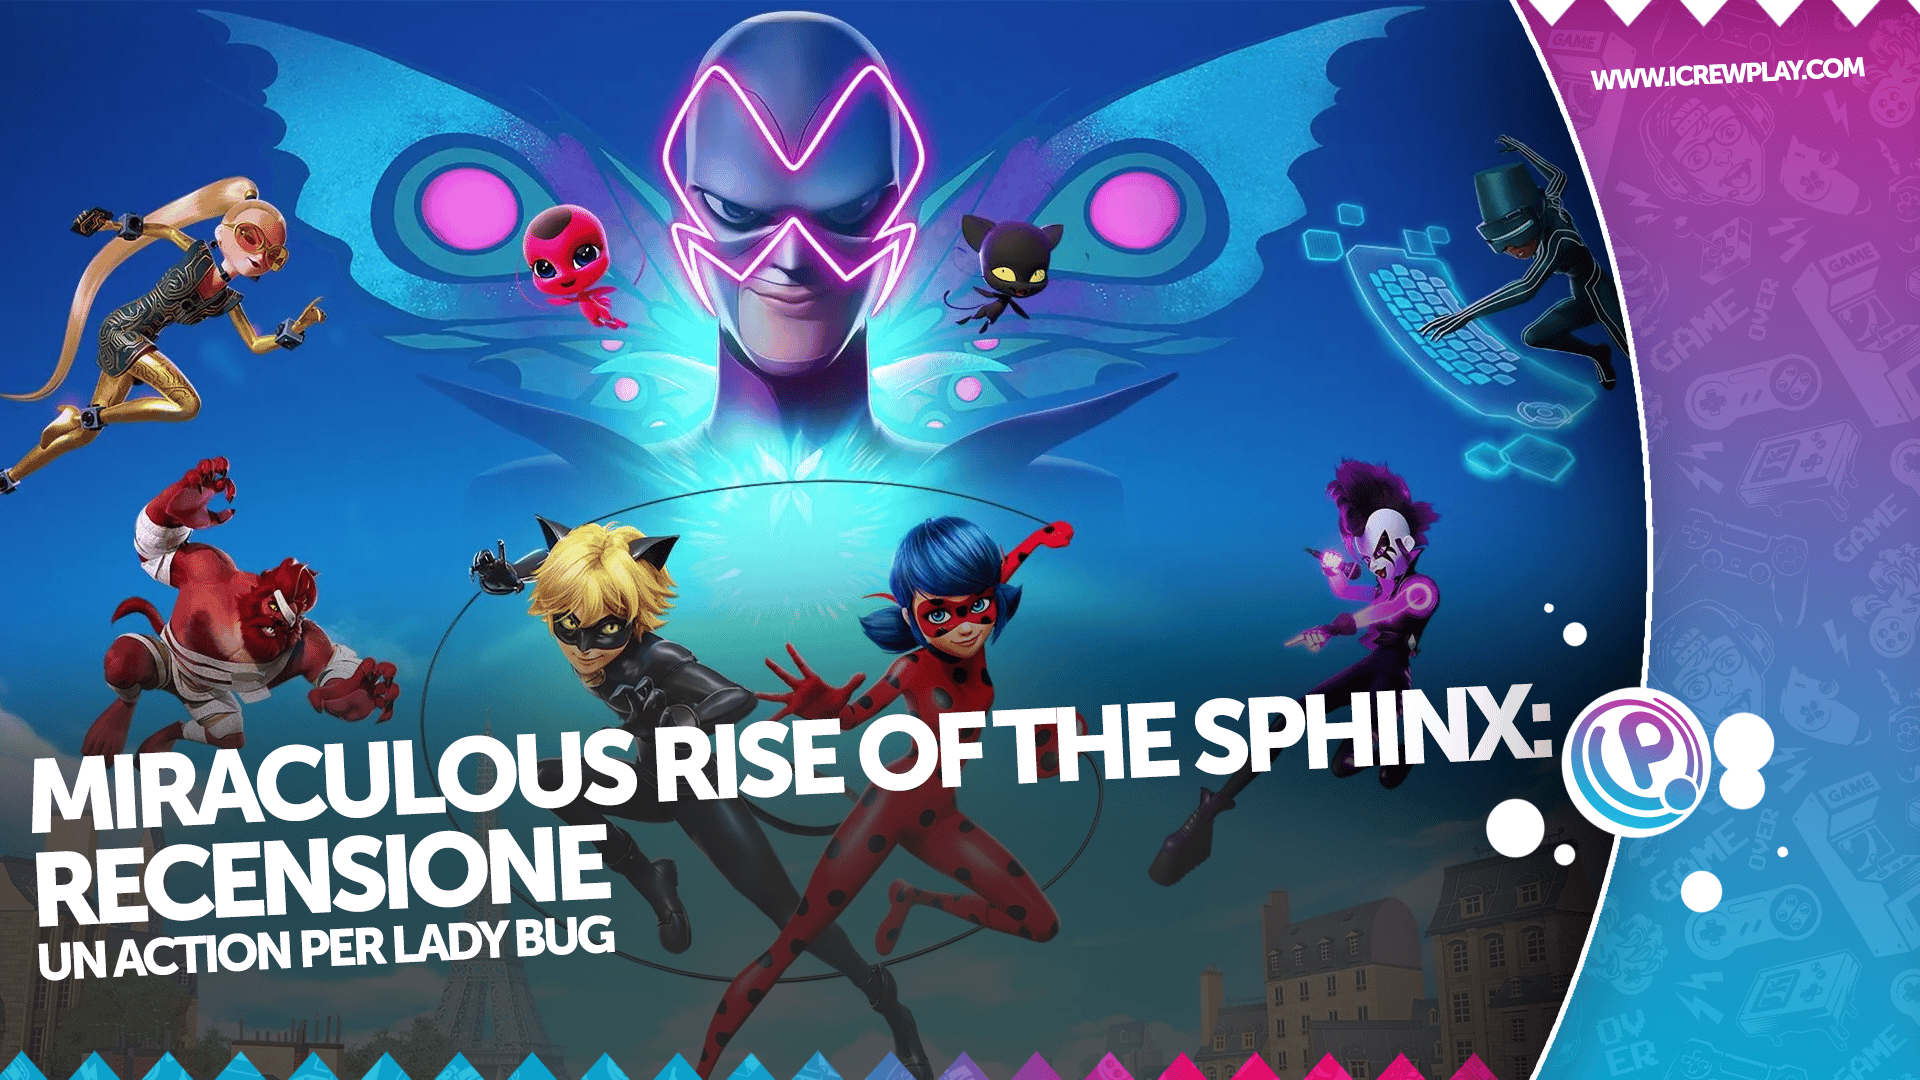 Miraculous rise of the sphinx: recensione per PlayStation 4 10